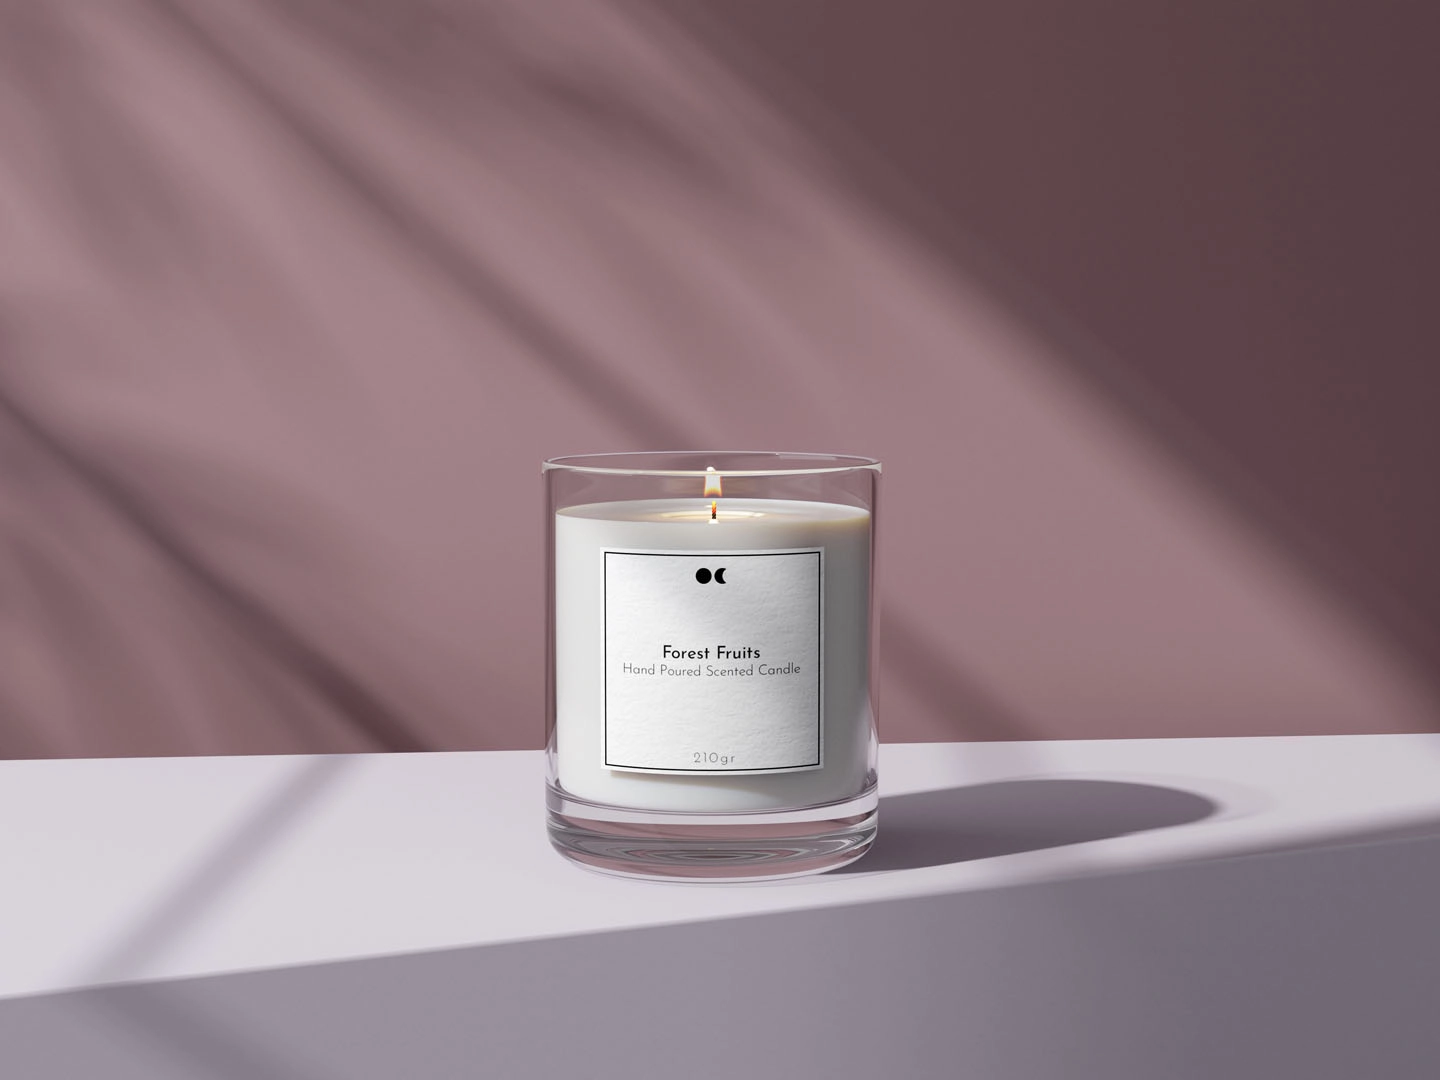 Scented candle in a jar - Forest Fruits - Lumond